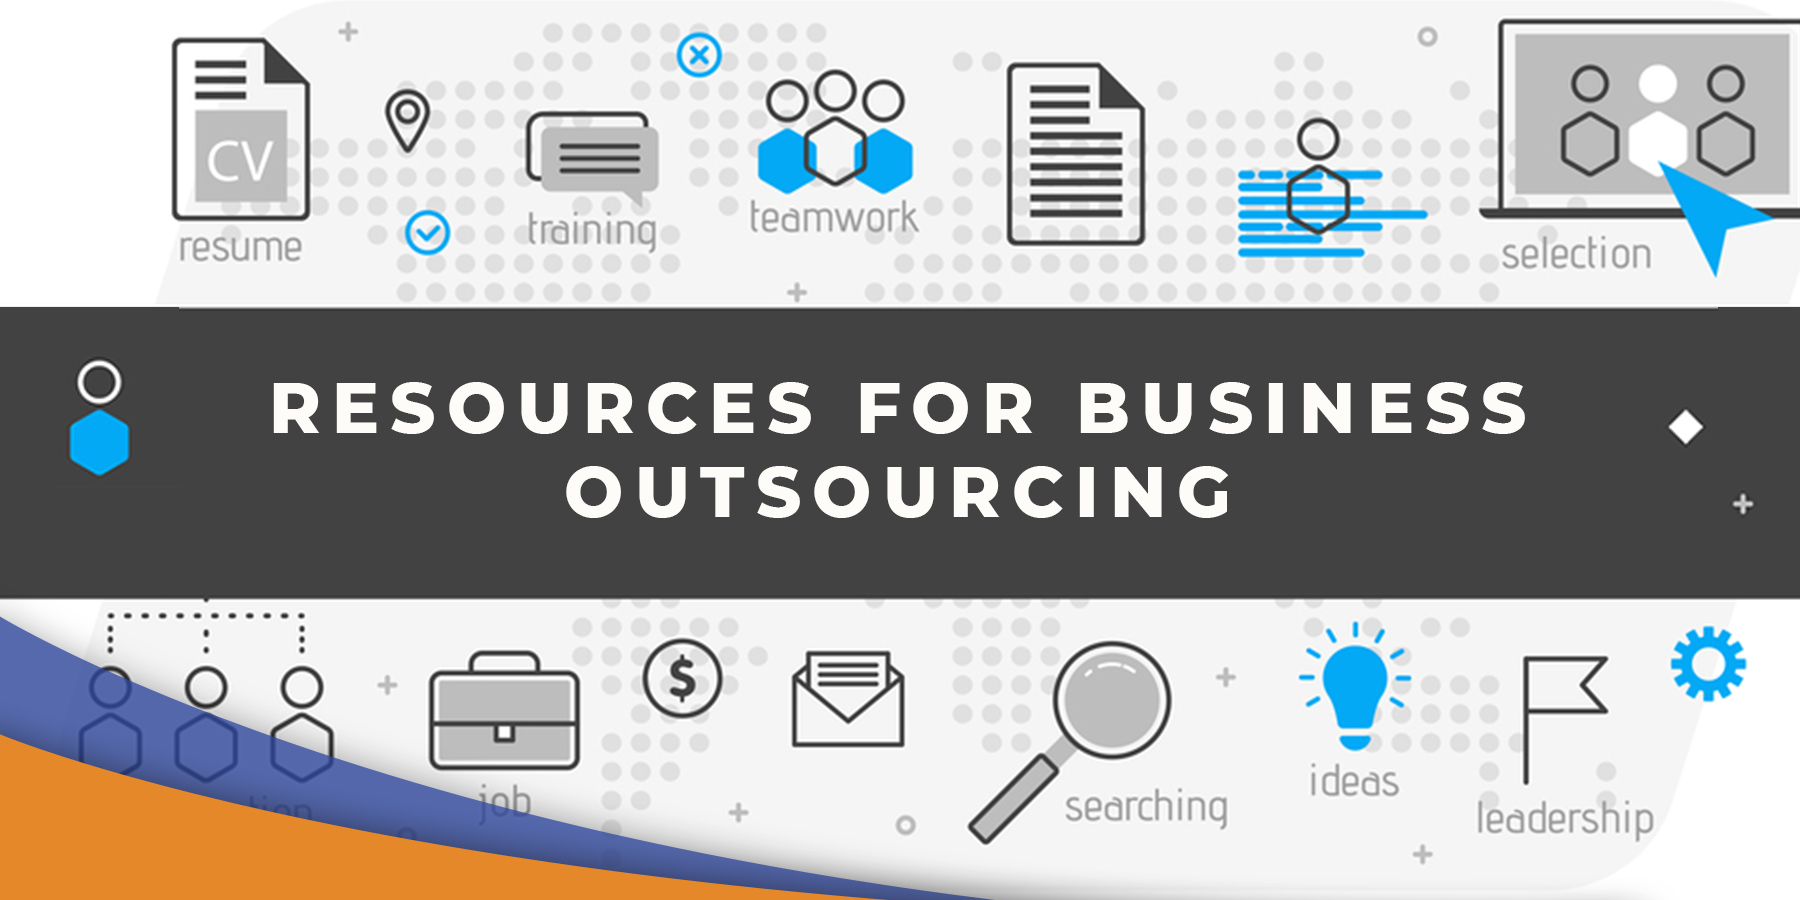 Resources for Business Outsourcing